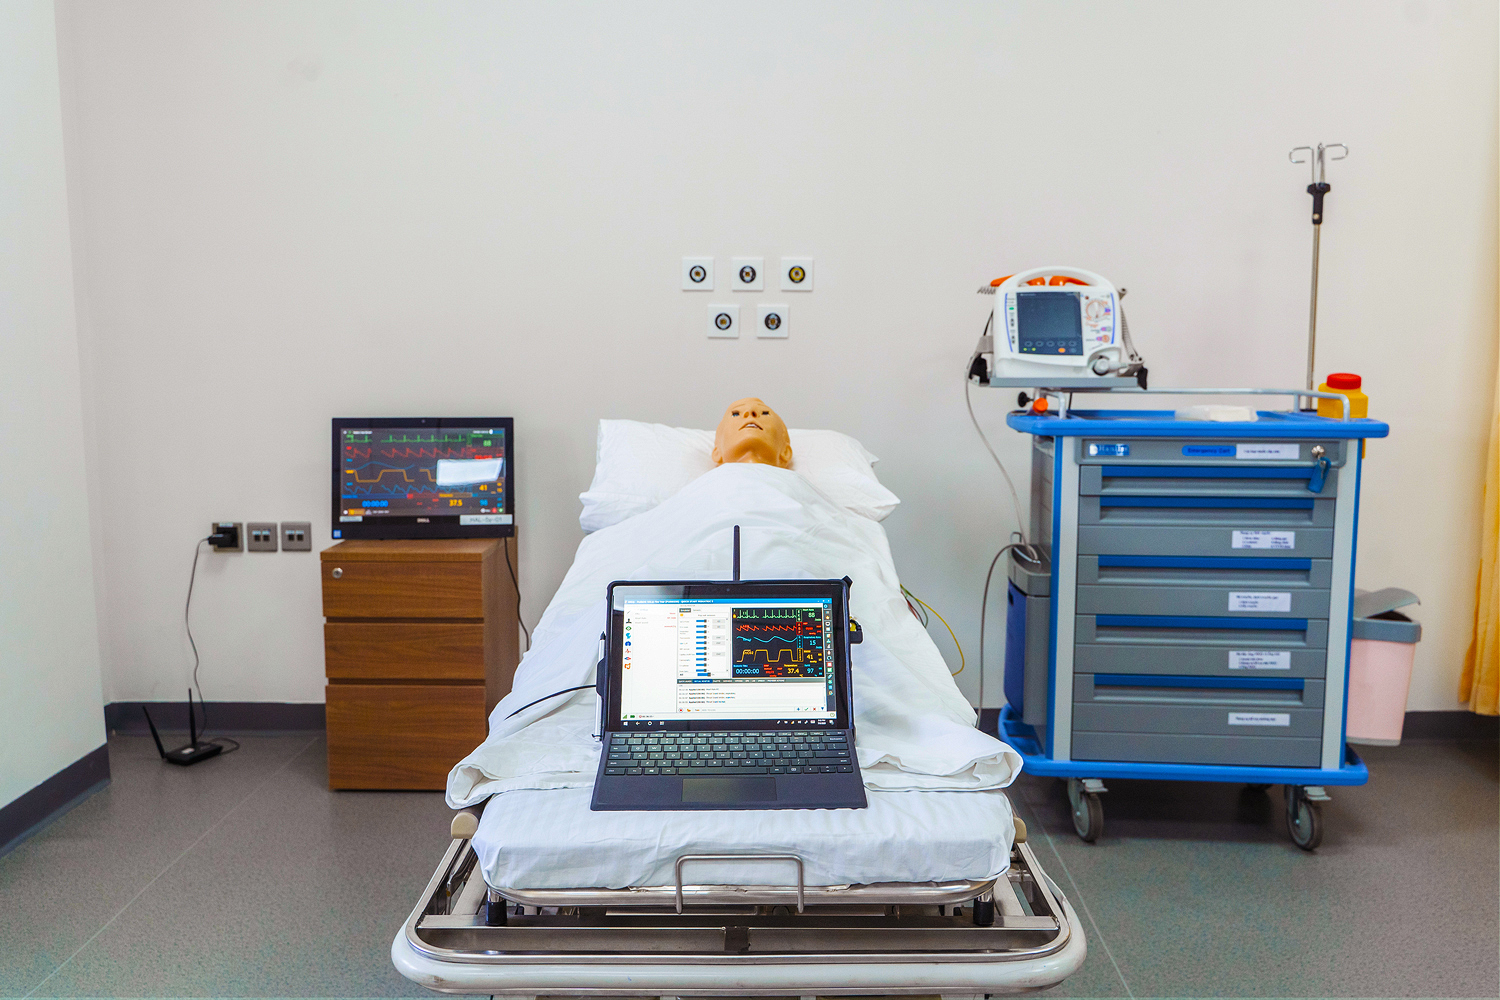 The standard operating procedure for controlling an interactive medical manikin is through a laptop or tablet.